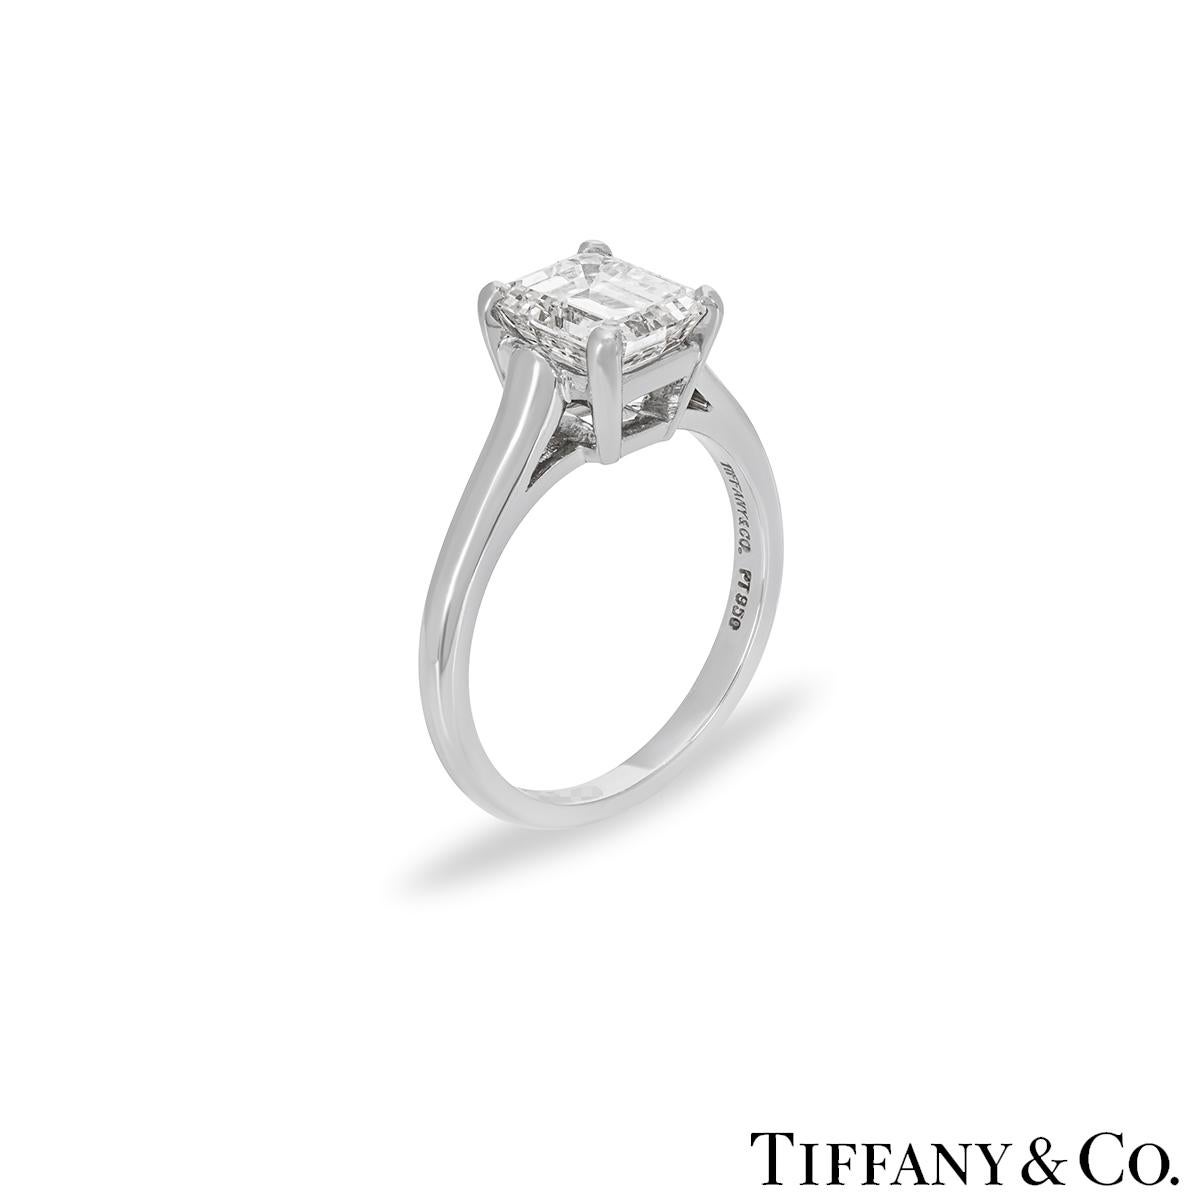 A stunning platinum diamond single stone ring by Tiffany & Co. The solitaire features an emerald cut diamond weighing 1.59ct, E colour and VS1 clarity set in a four prong mount. The 2mm ring has a gross weight of 4.9 grams and is currently a UK size